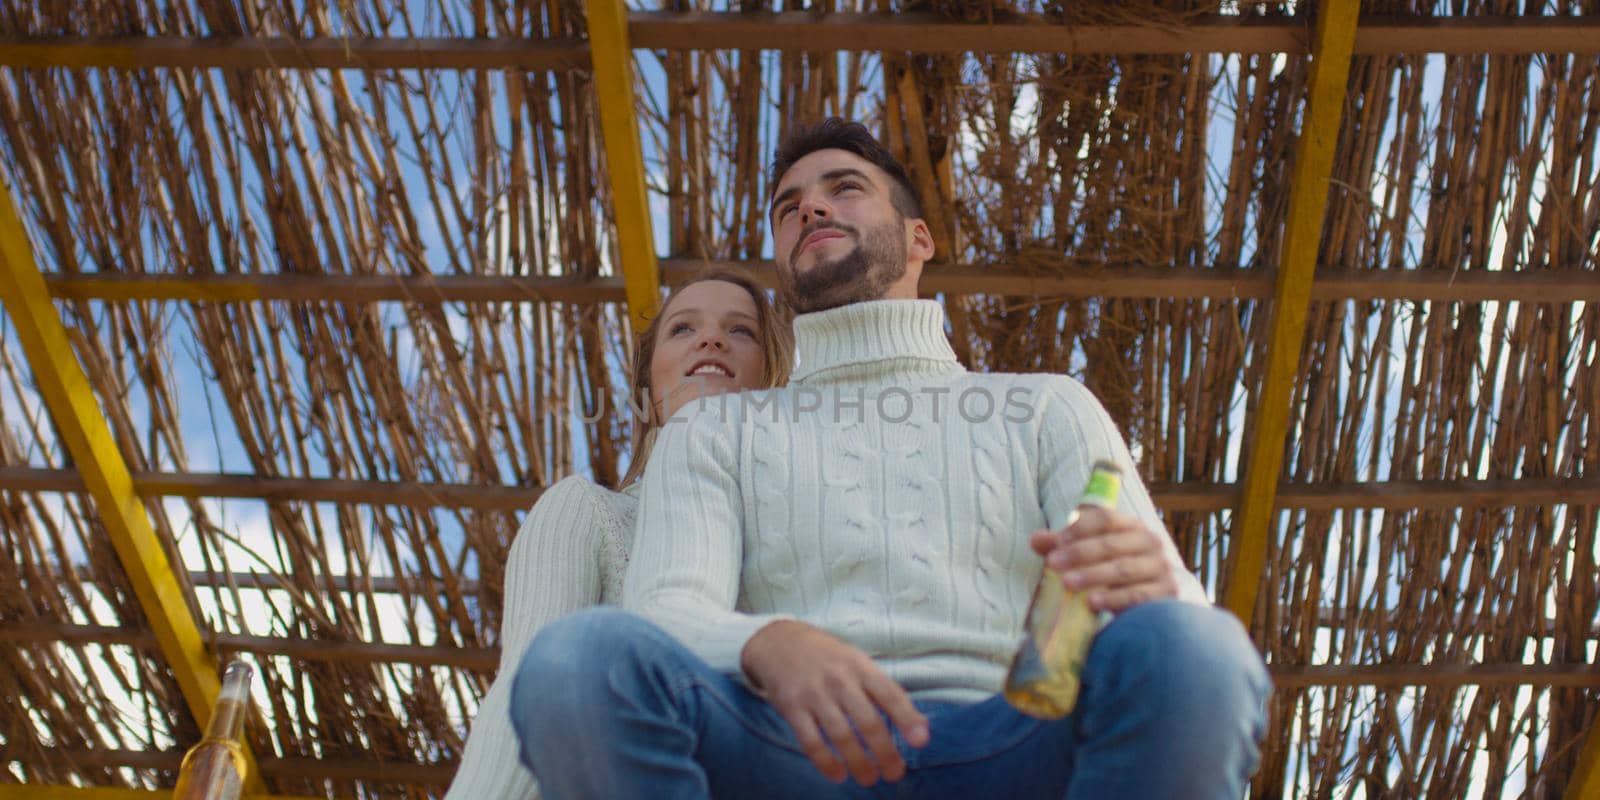 Couple Drinking Beer Together on beach during autumn time